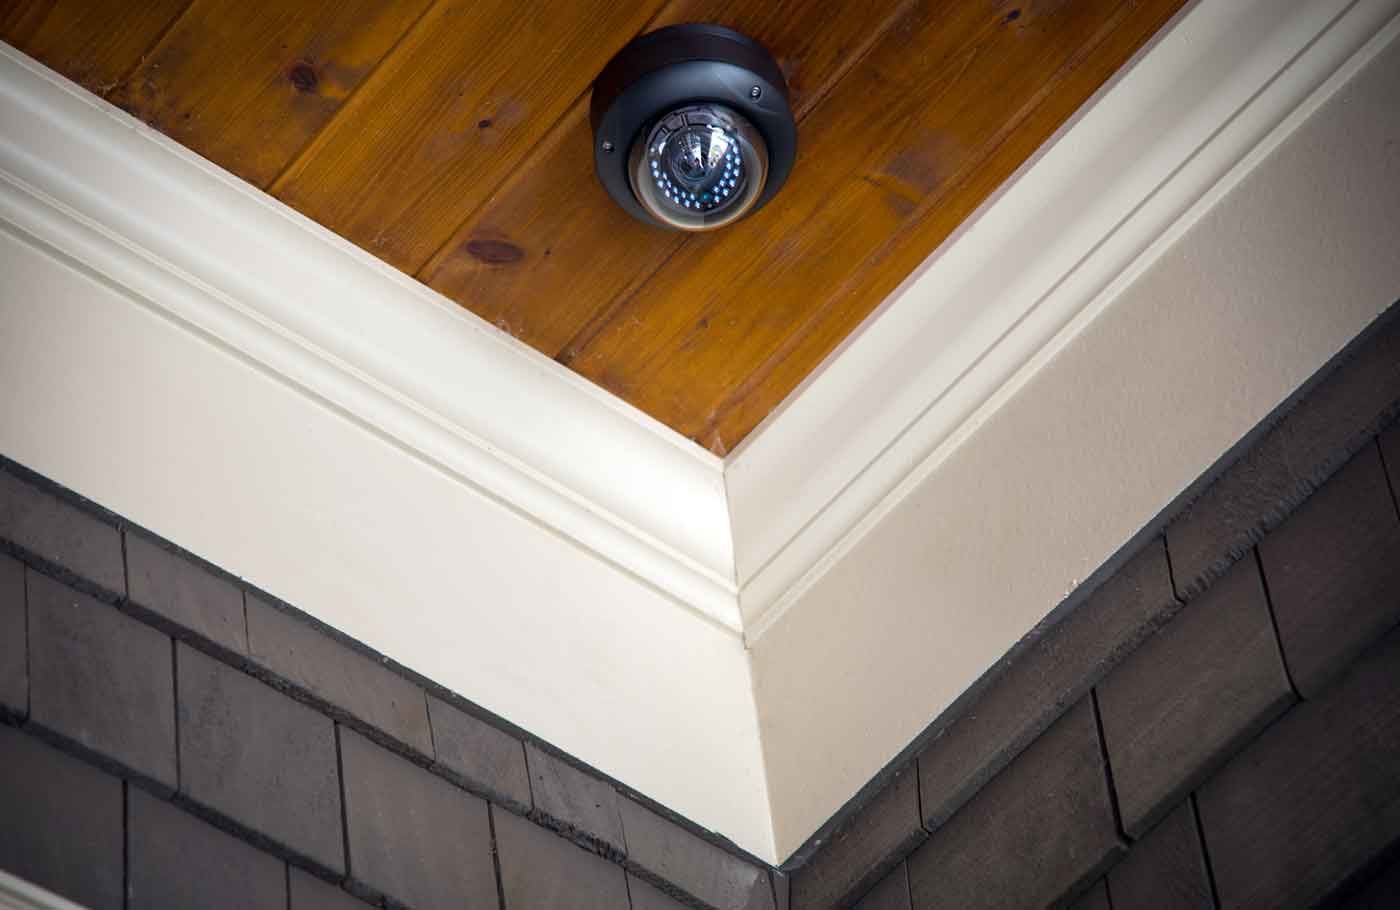 security camera on wooden ceiling